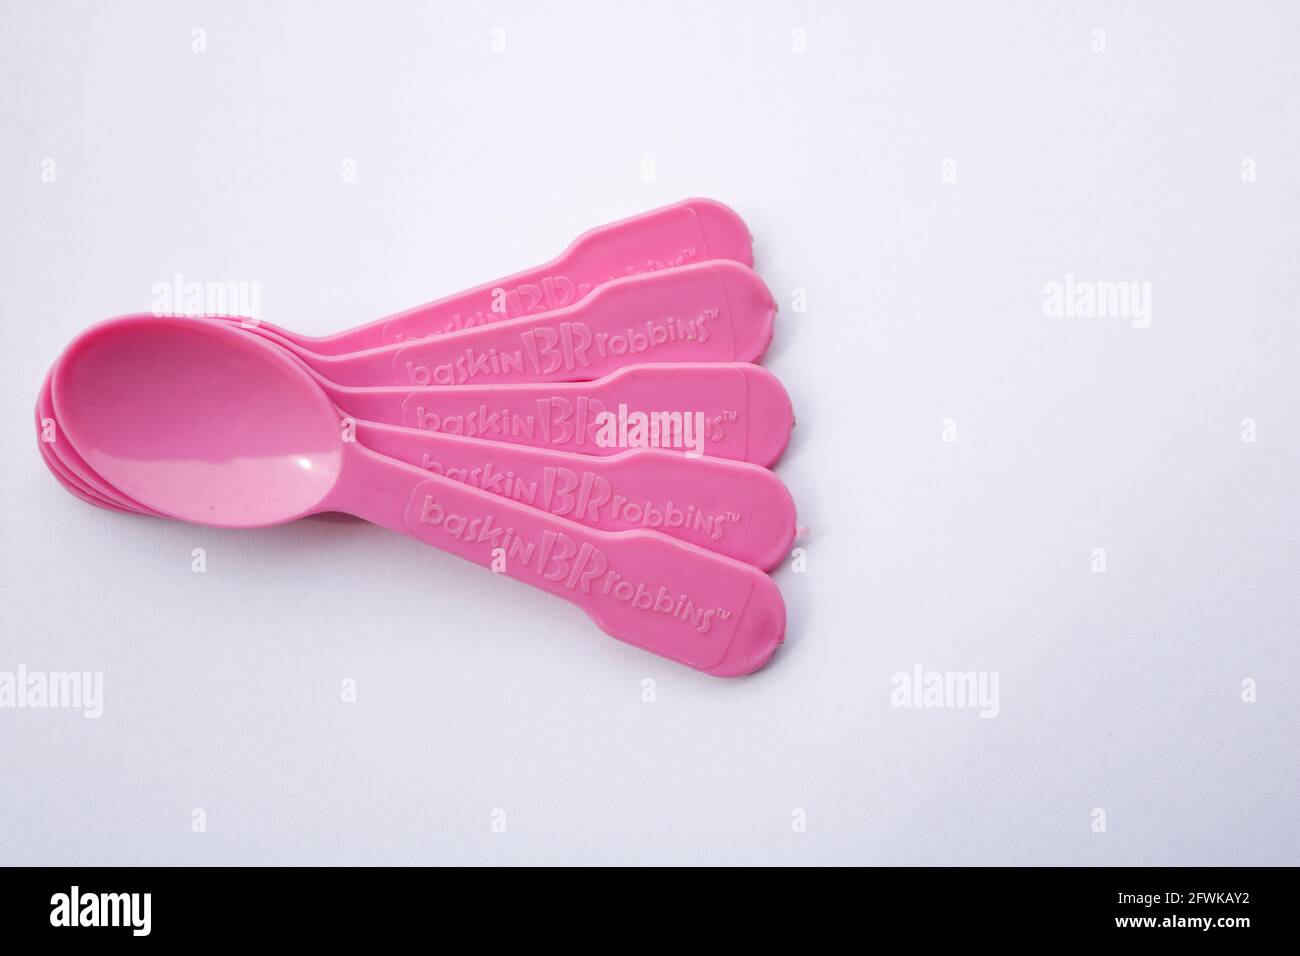 Lahore, Punjab, Pakistan - April 2, 2021: Multiple Plastic spoons from Baskin Robbins on isolated white background with negative space. Stock Photo